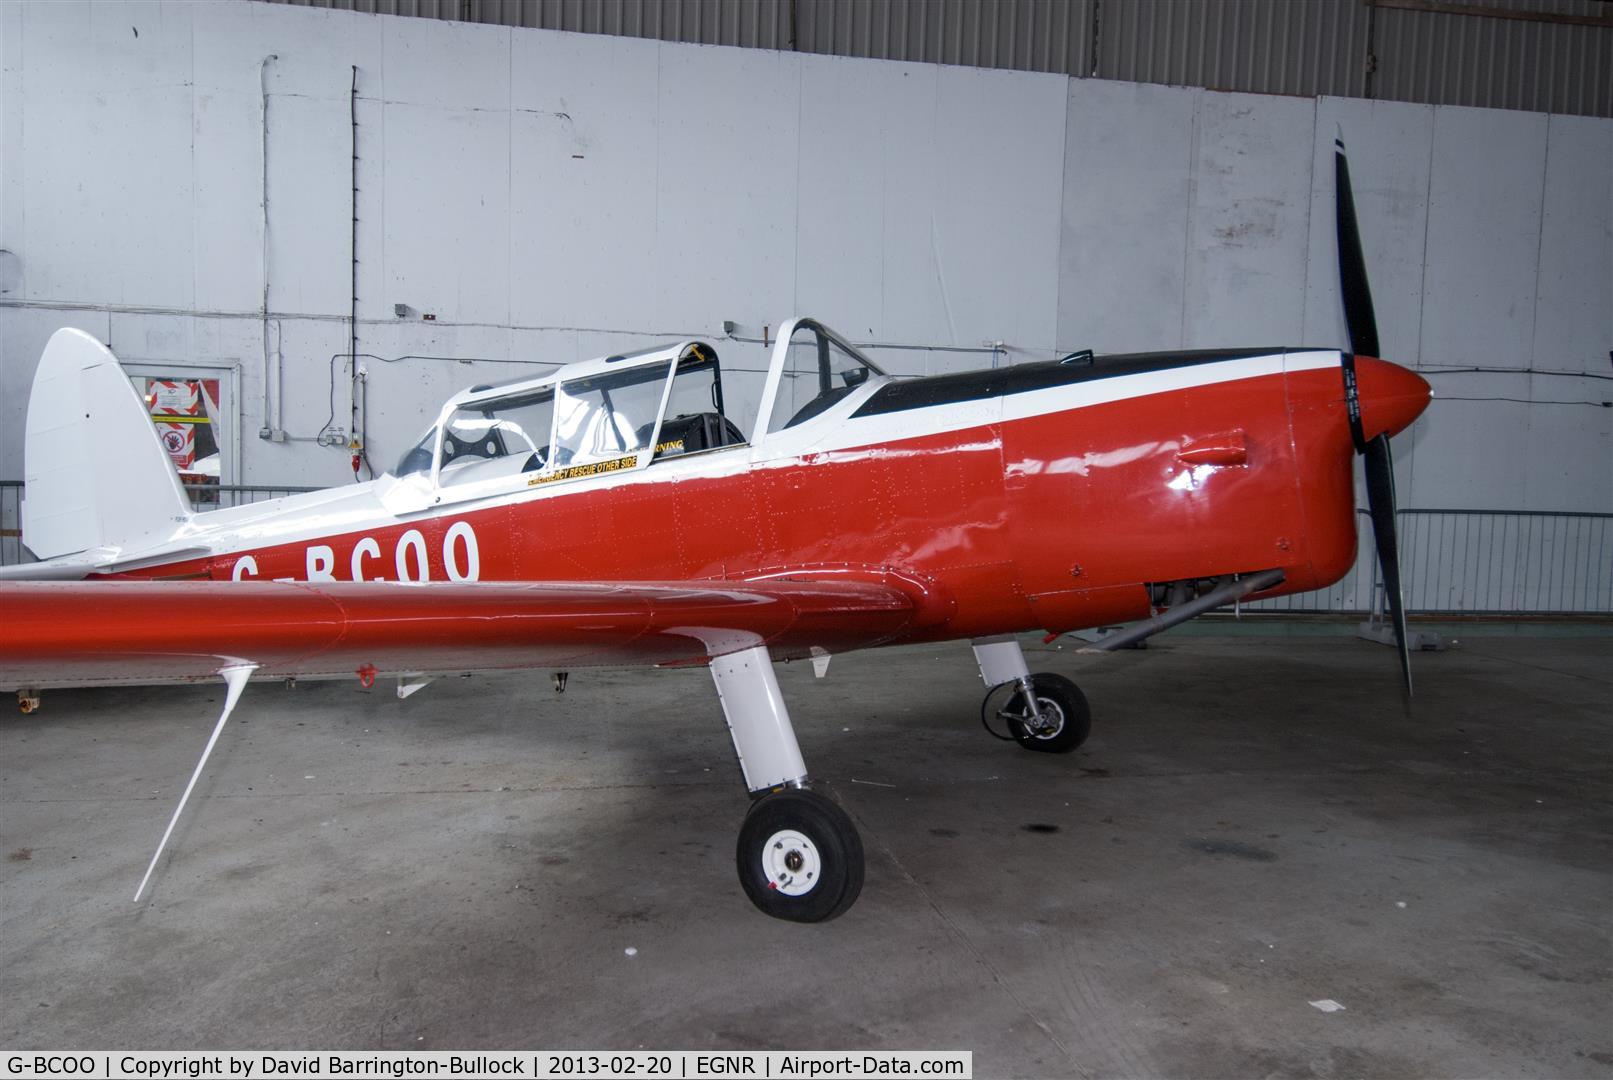 G-BCOO, 1950 De Havilland DHC-1 Chipmunk T.10 C/N C1/0209, Pre restoration. Aircraft is about to fly again after a long lay up at Hawarden..